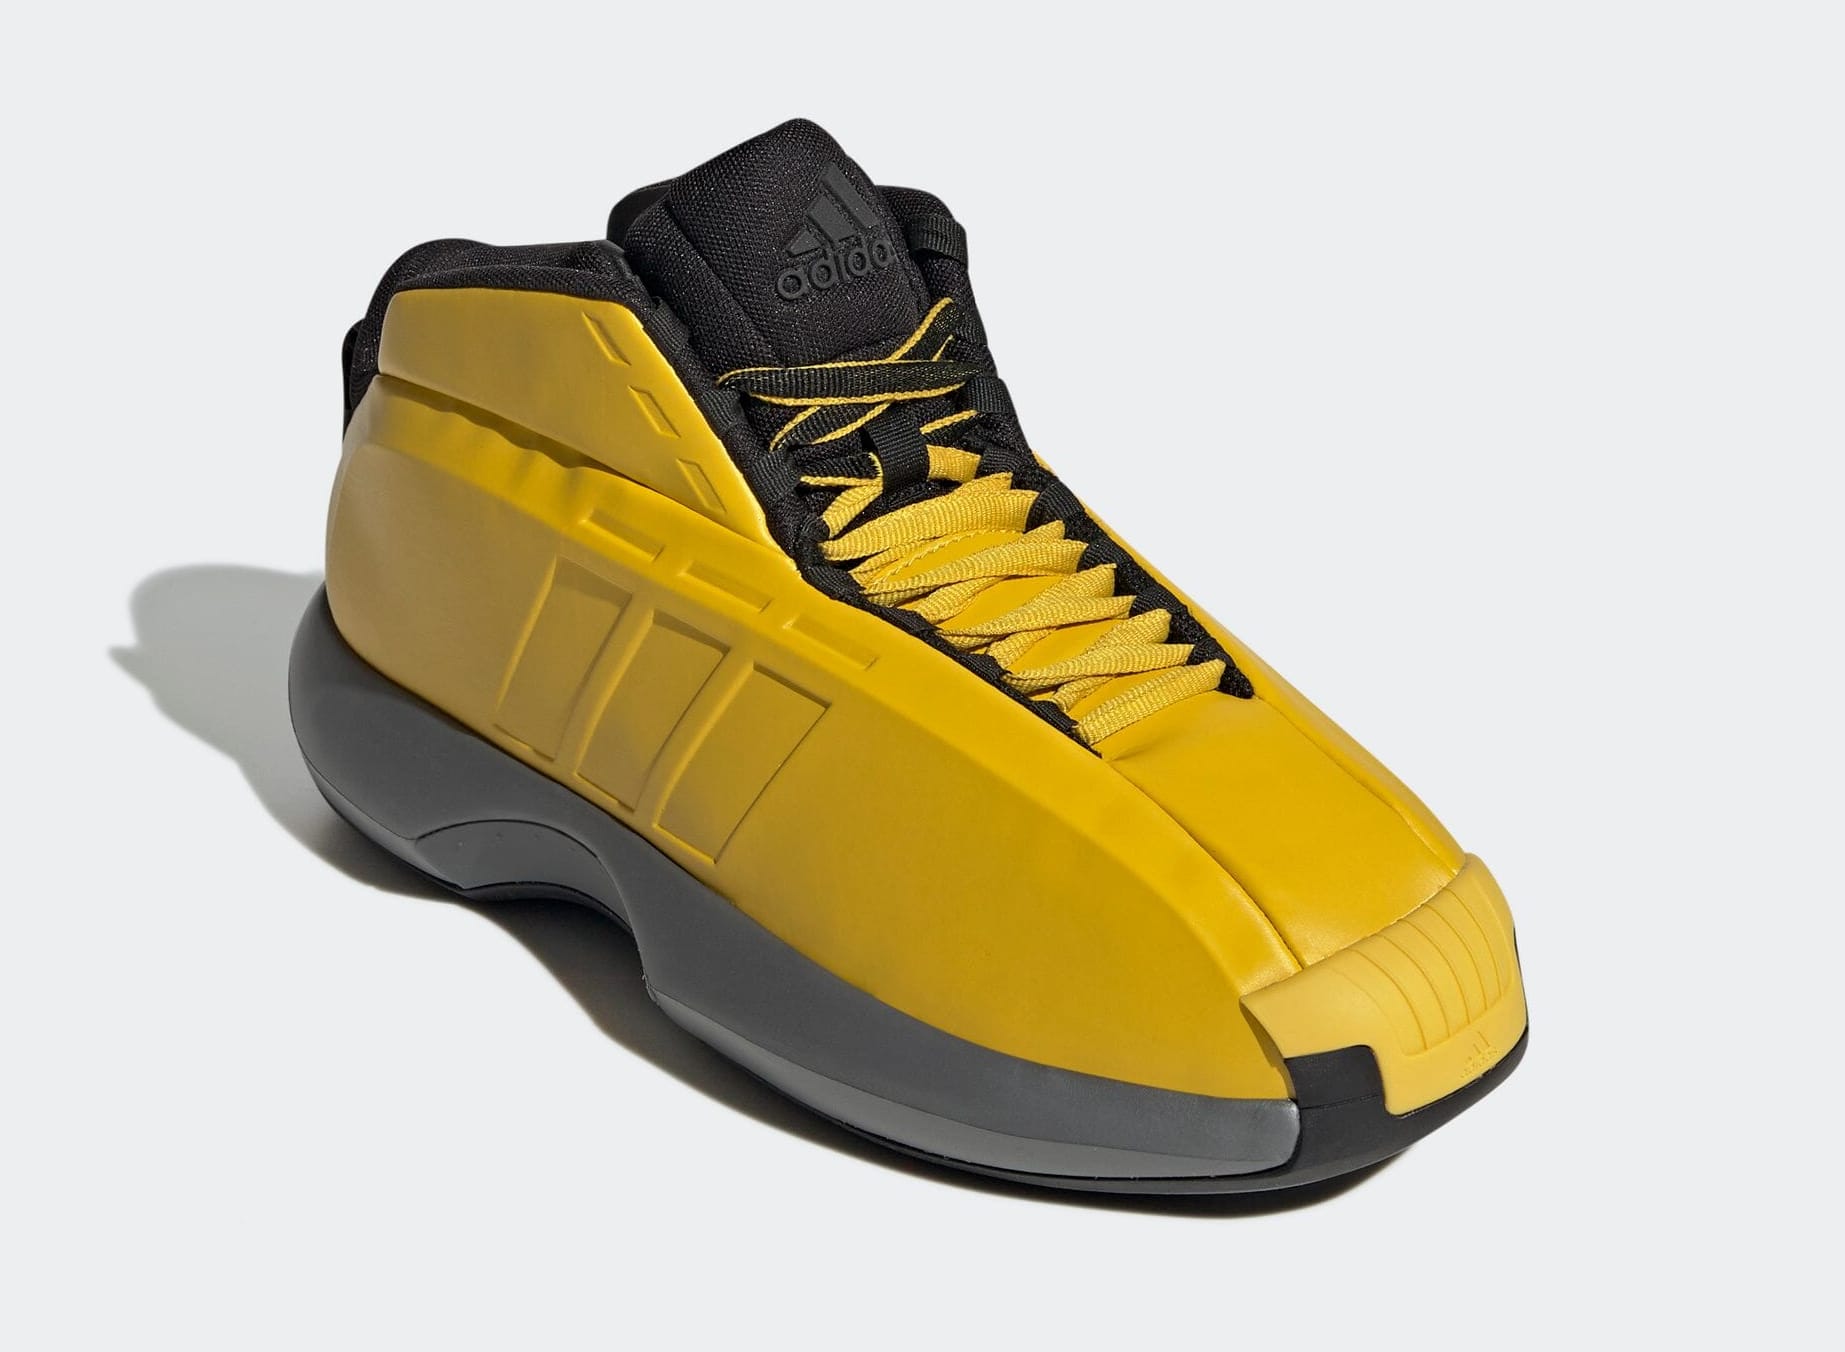 Kobe Bryant's 'Sunshine' Adidas Crazy 1 Releases This Week | Complex